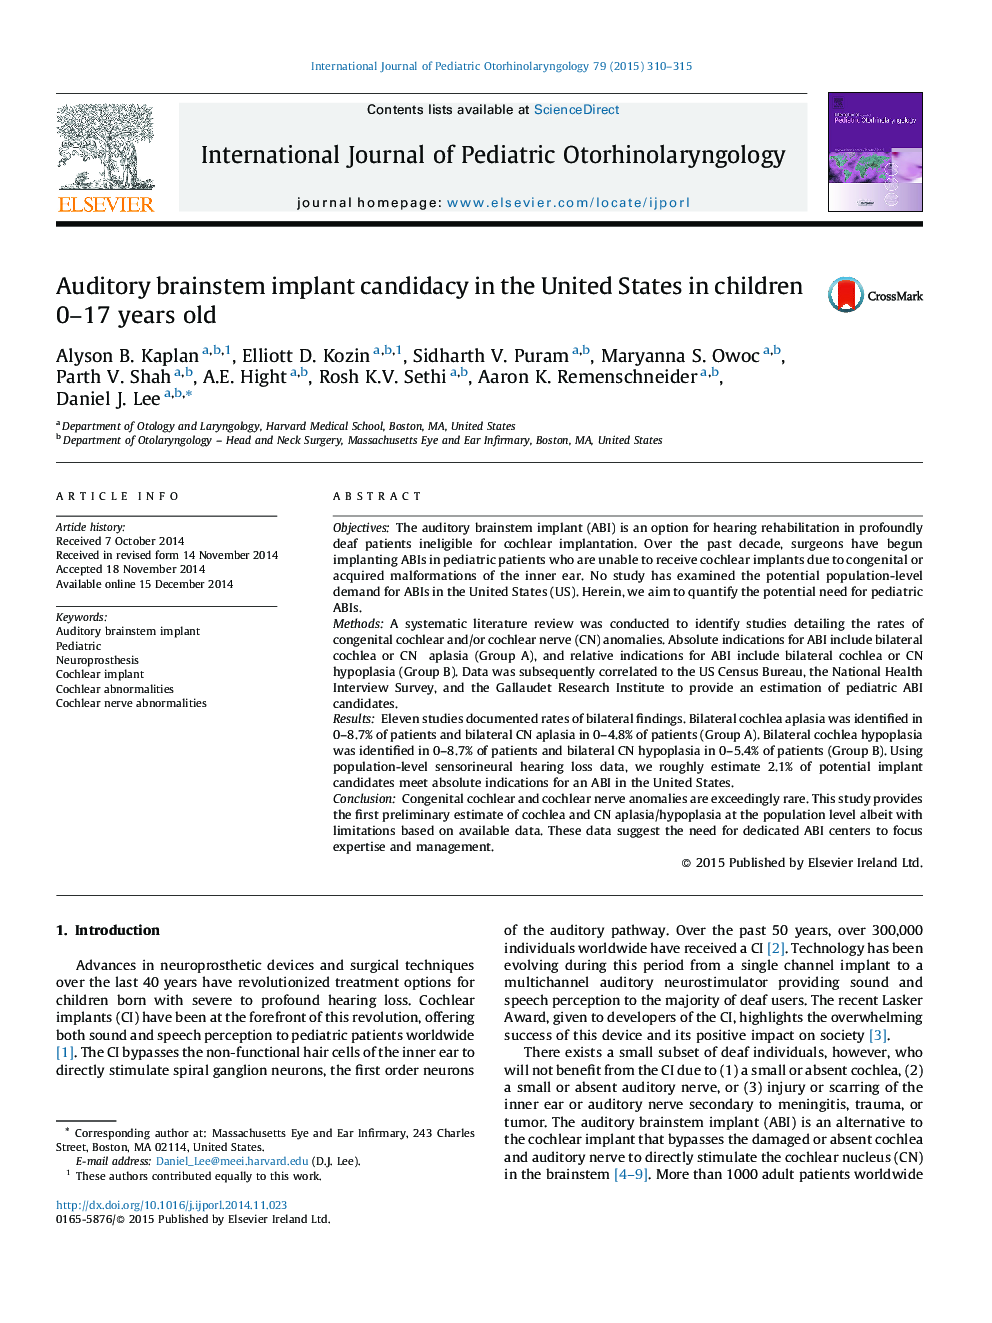 Auditory brainstem implant candidacy in the United States in children 0–17 years old